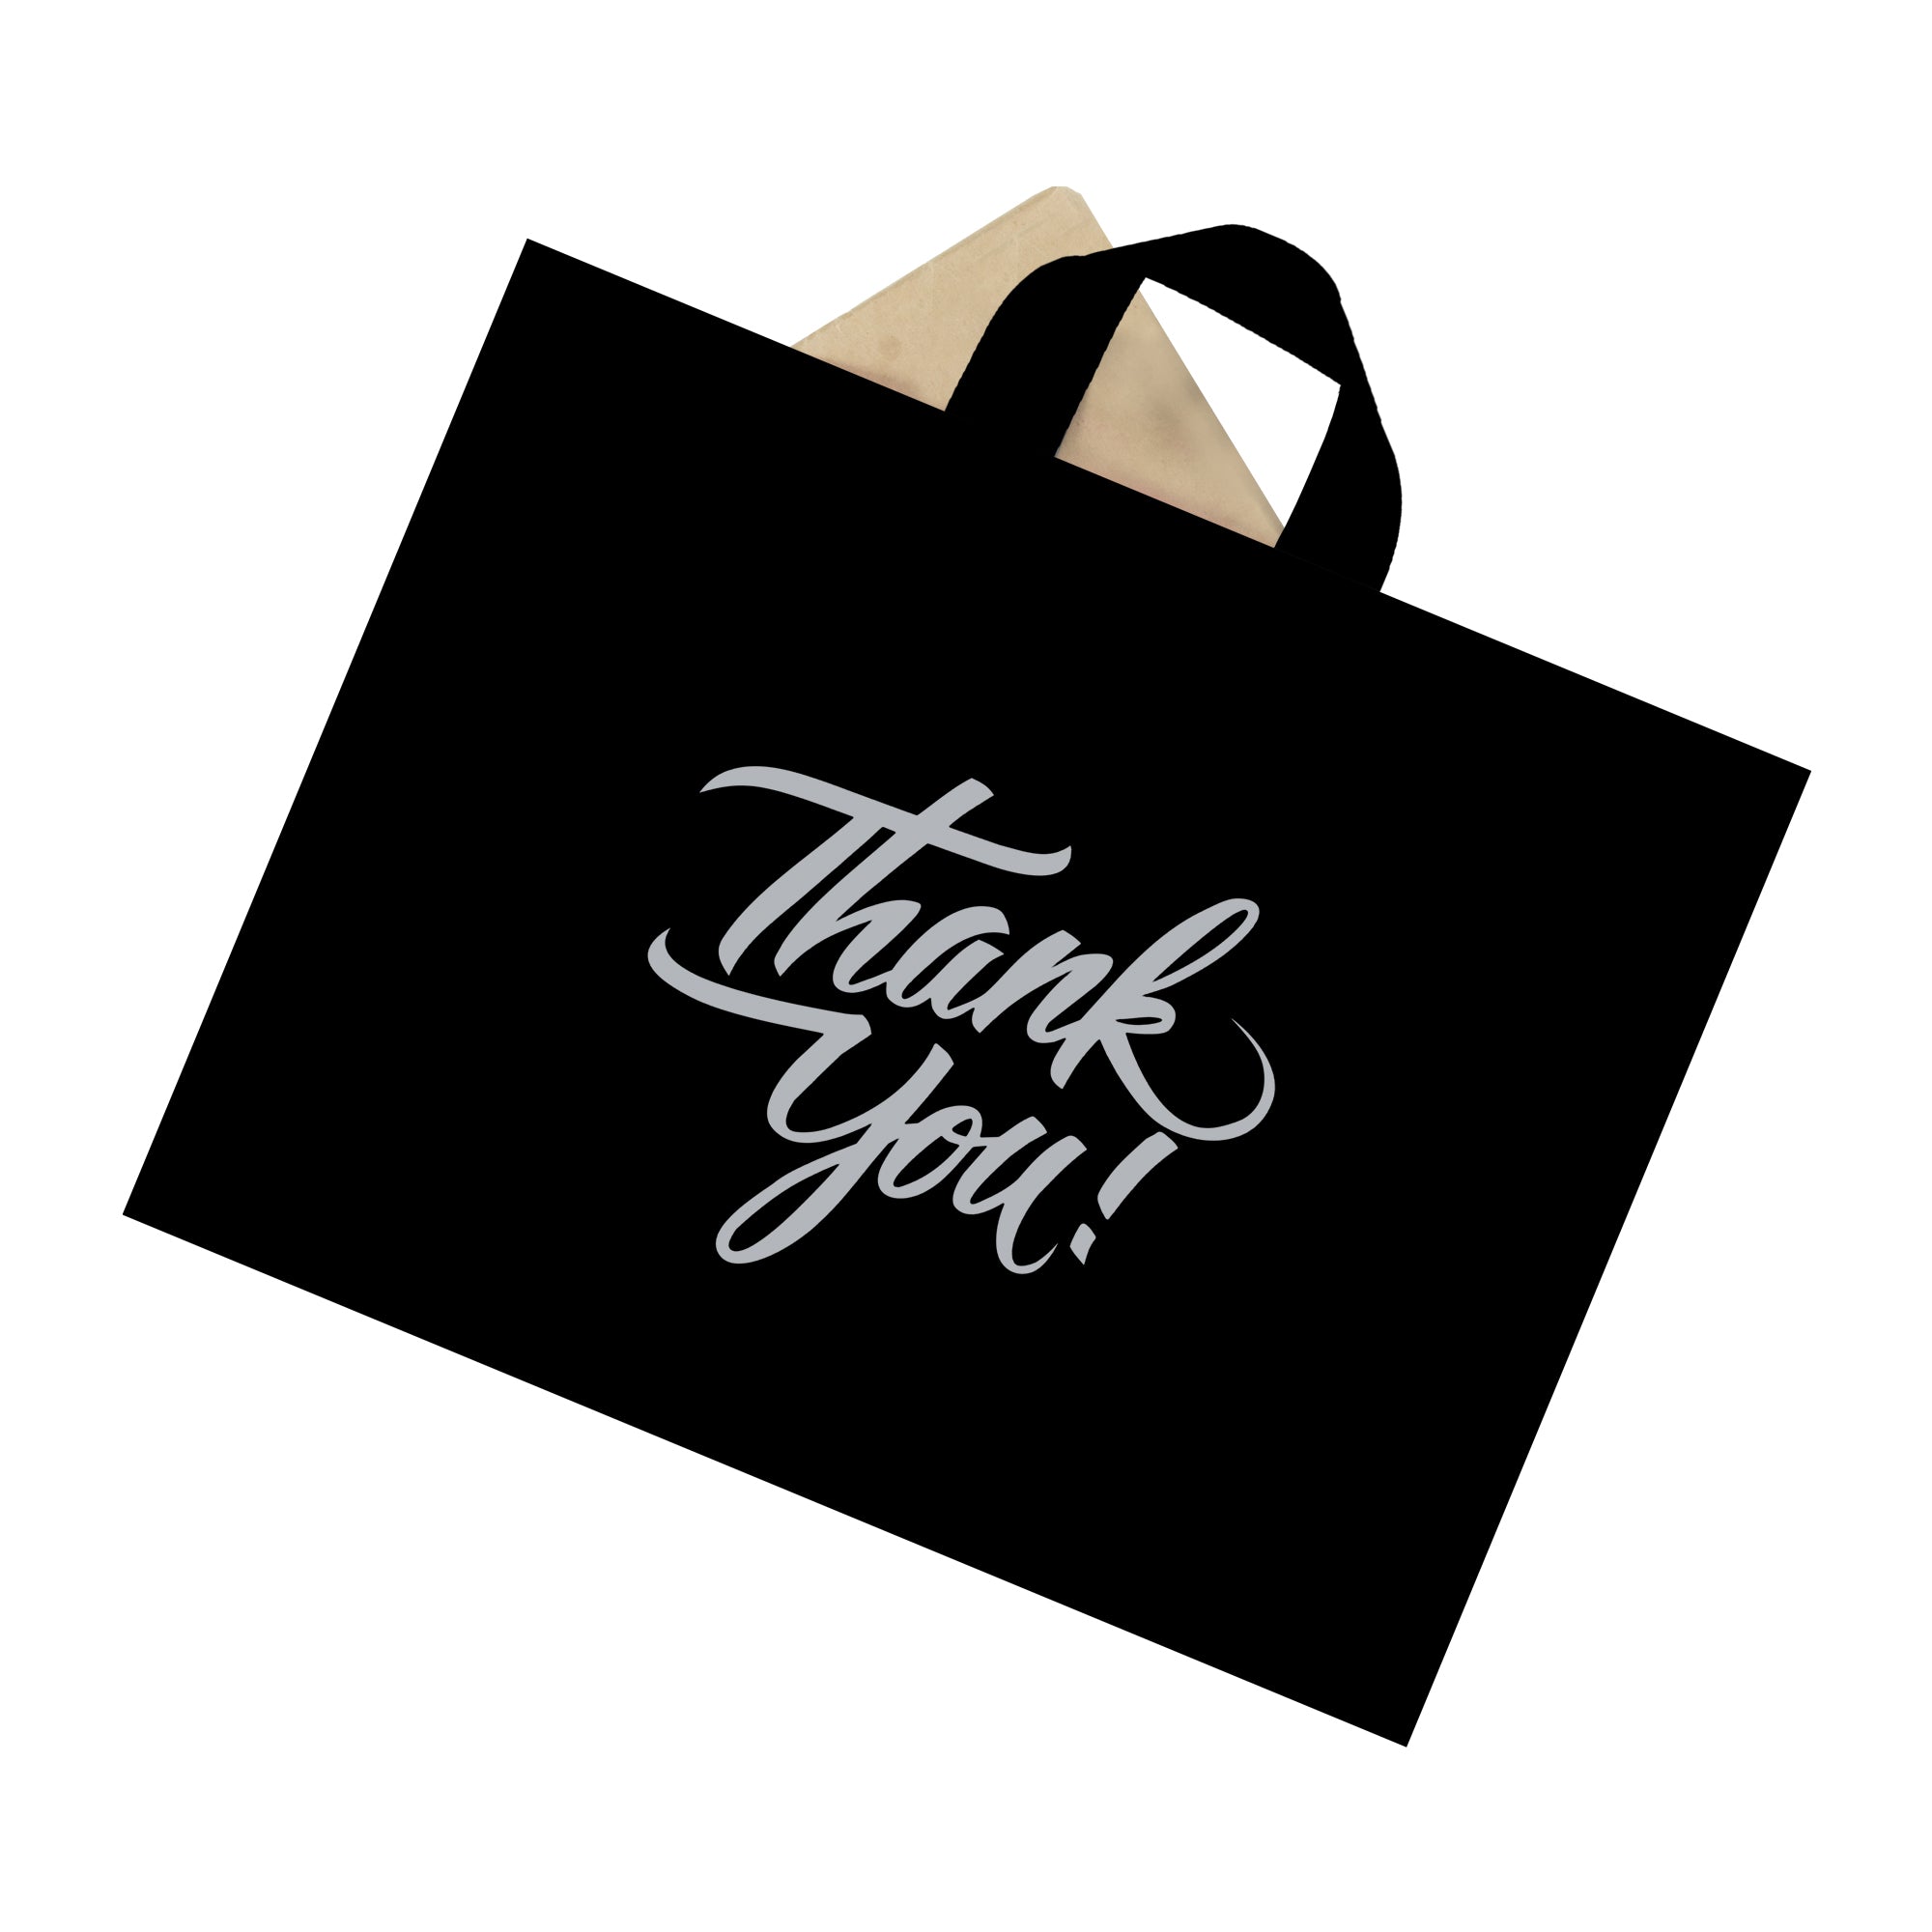 16 x 12.5 black loop handle thank you bag with object inside